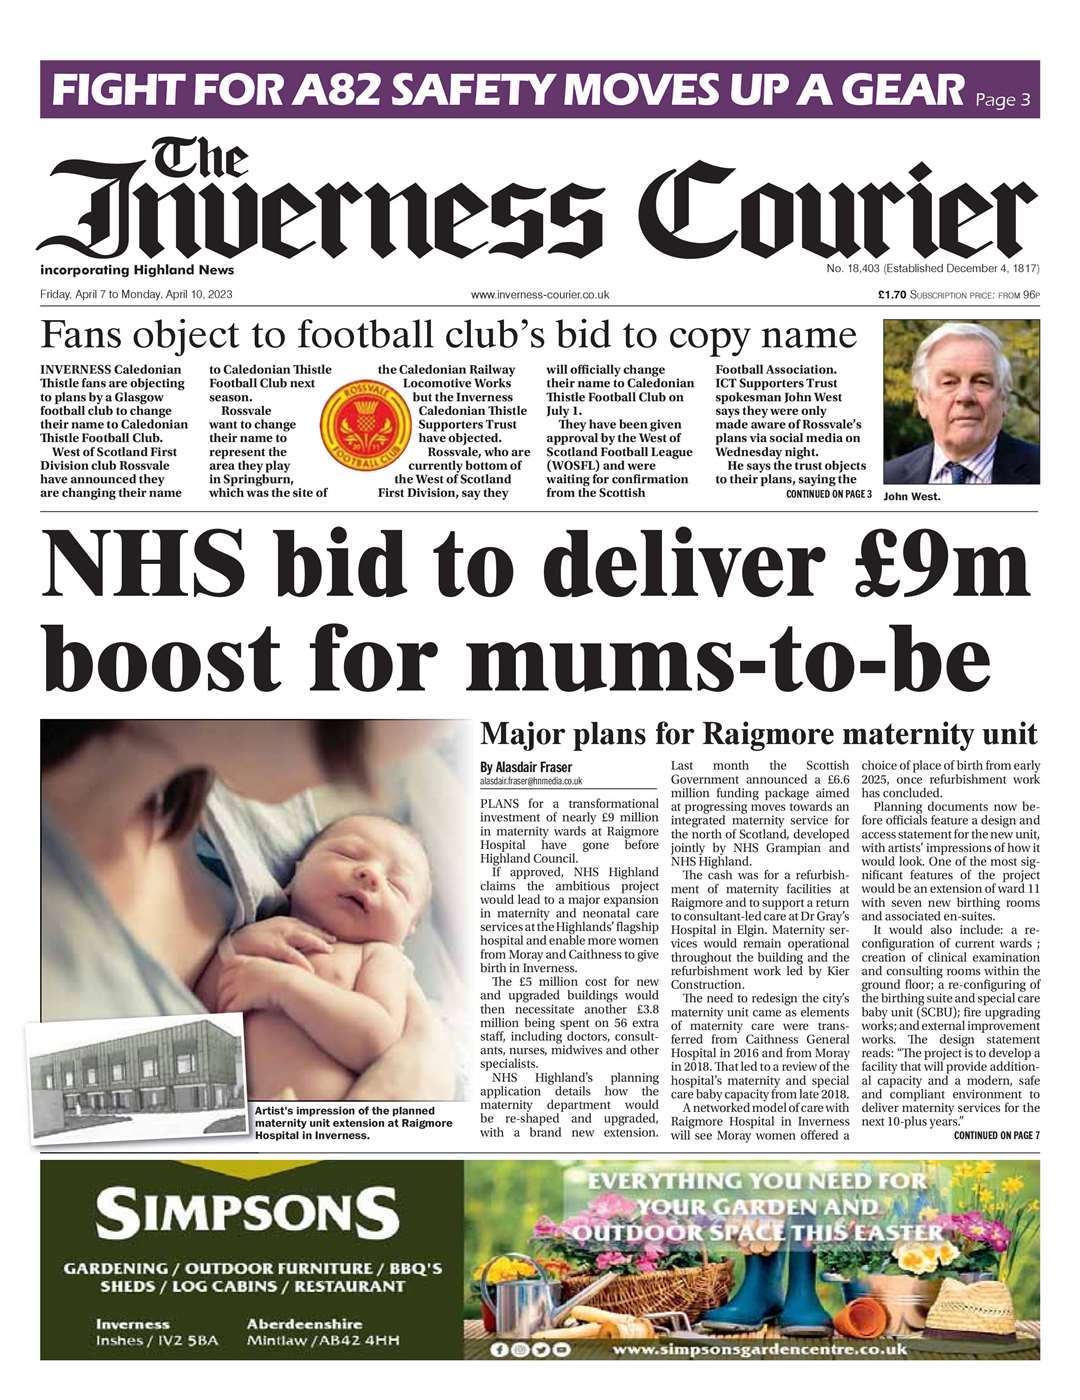 The Inverness Courier, April 7, front page.